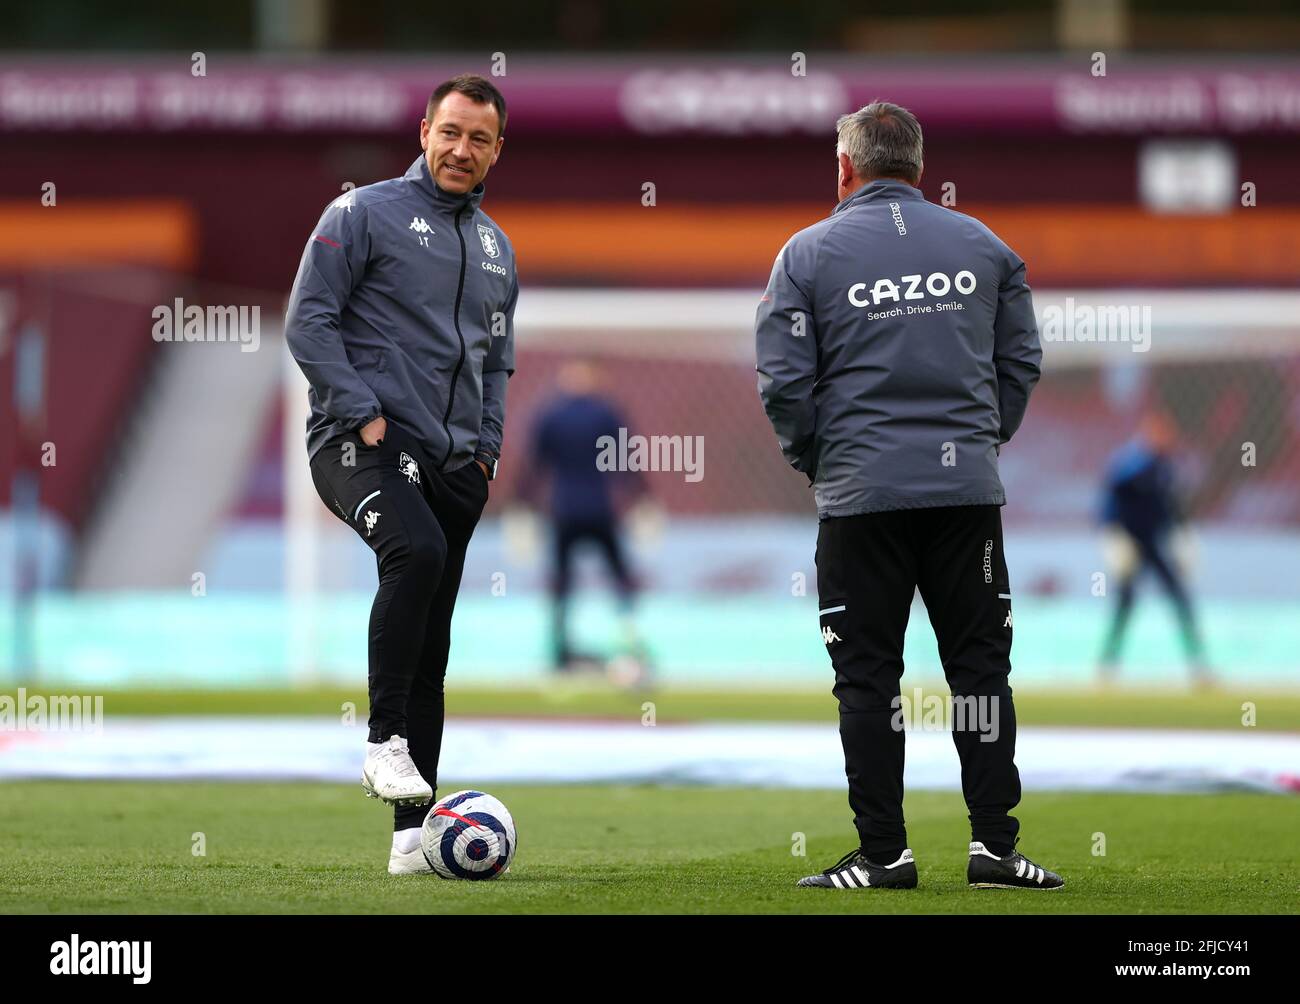 Aston Villa assistant coaches John Terry and Craig Shakespeare warming up before the Premier League match at Villa Park, Birmingham. Picture date: Sunday April 25, 2021. Stock Photo